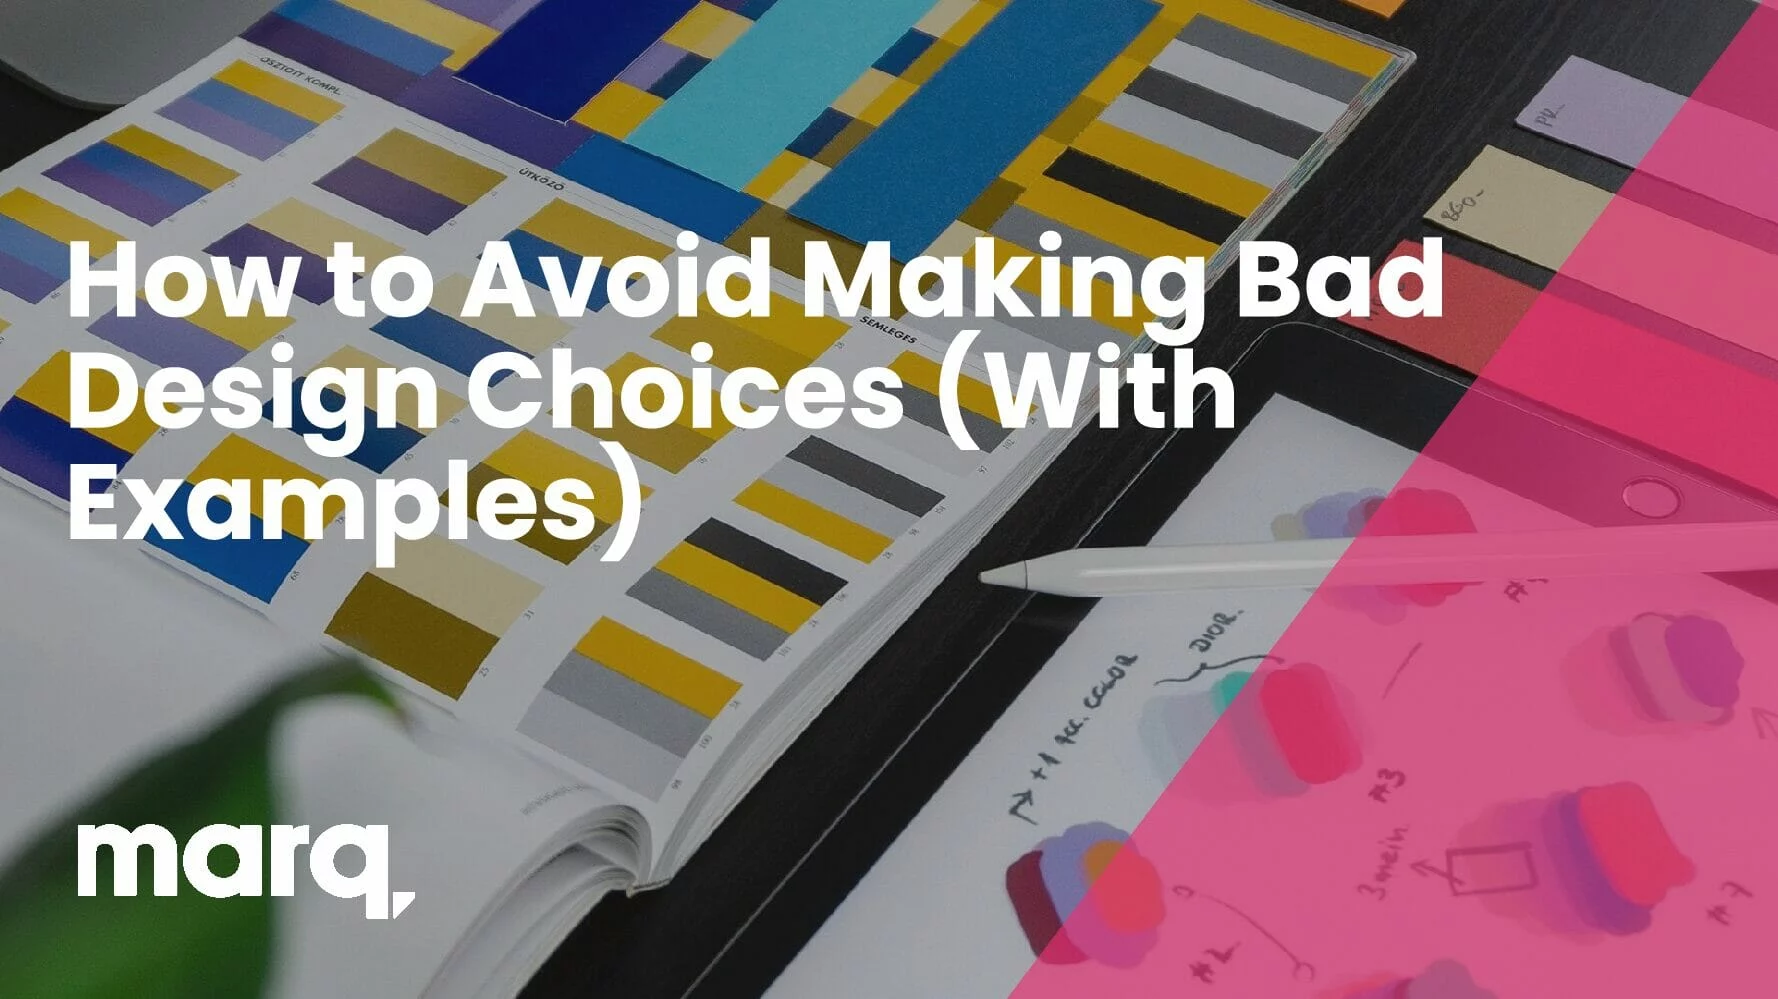 How to Avoid Making Bad Design Choices